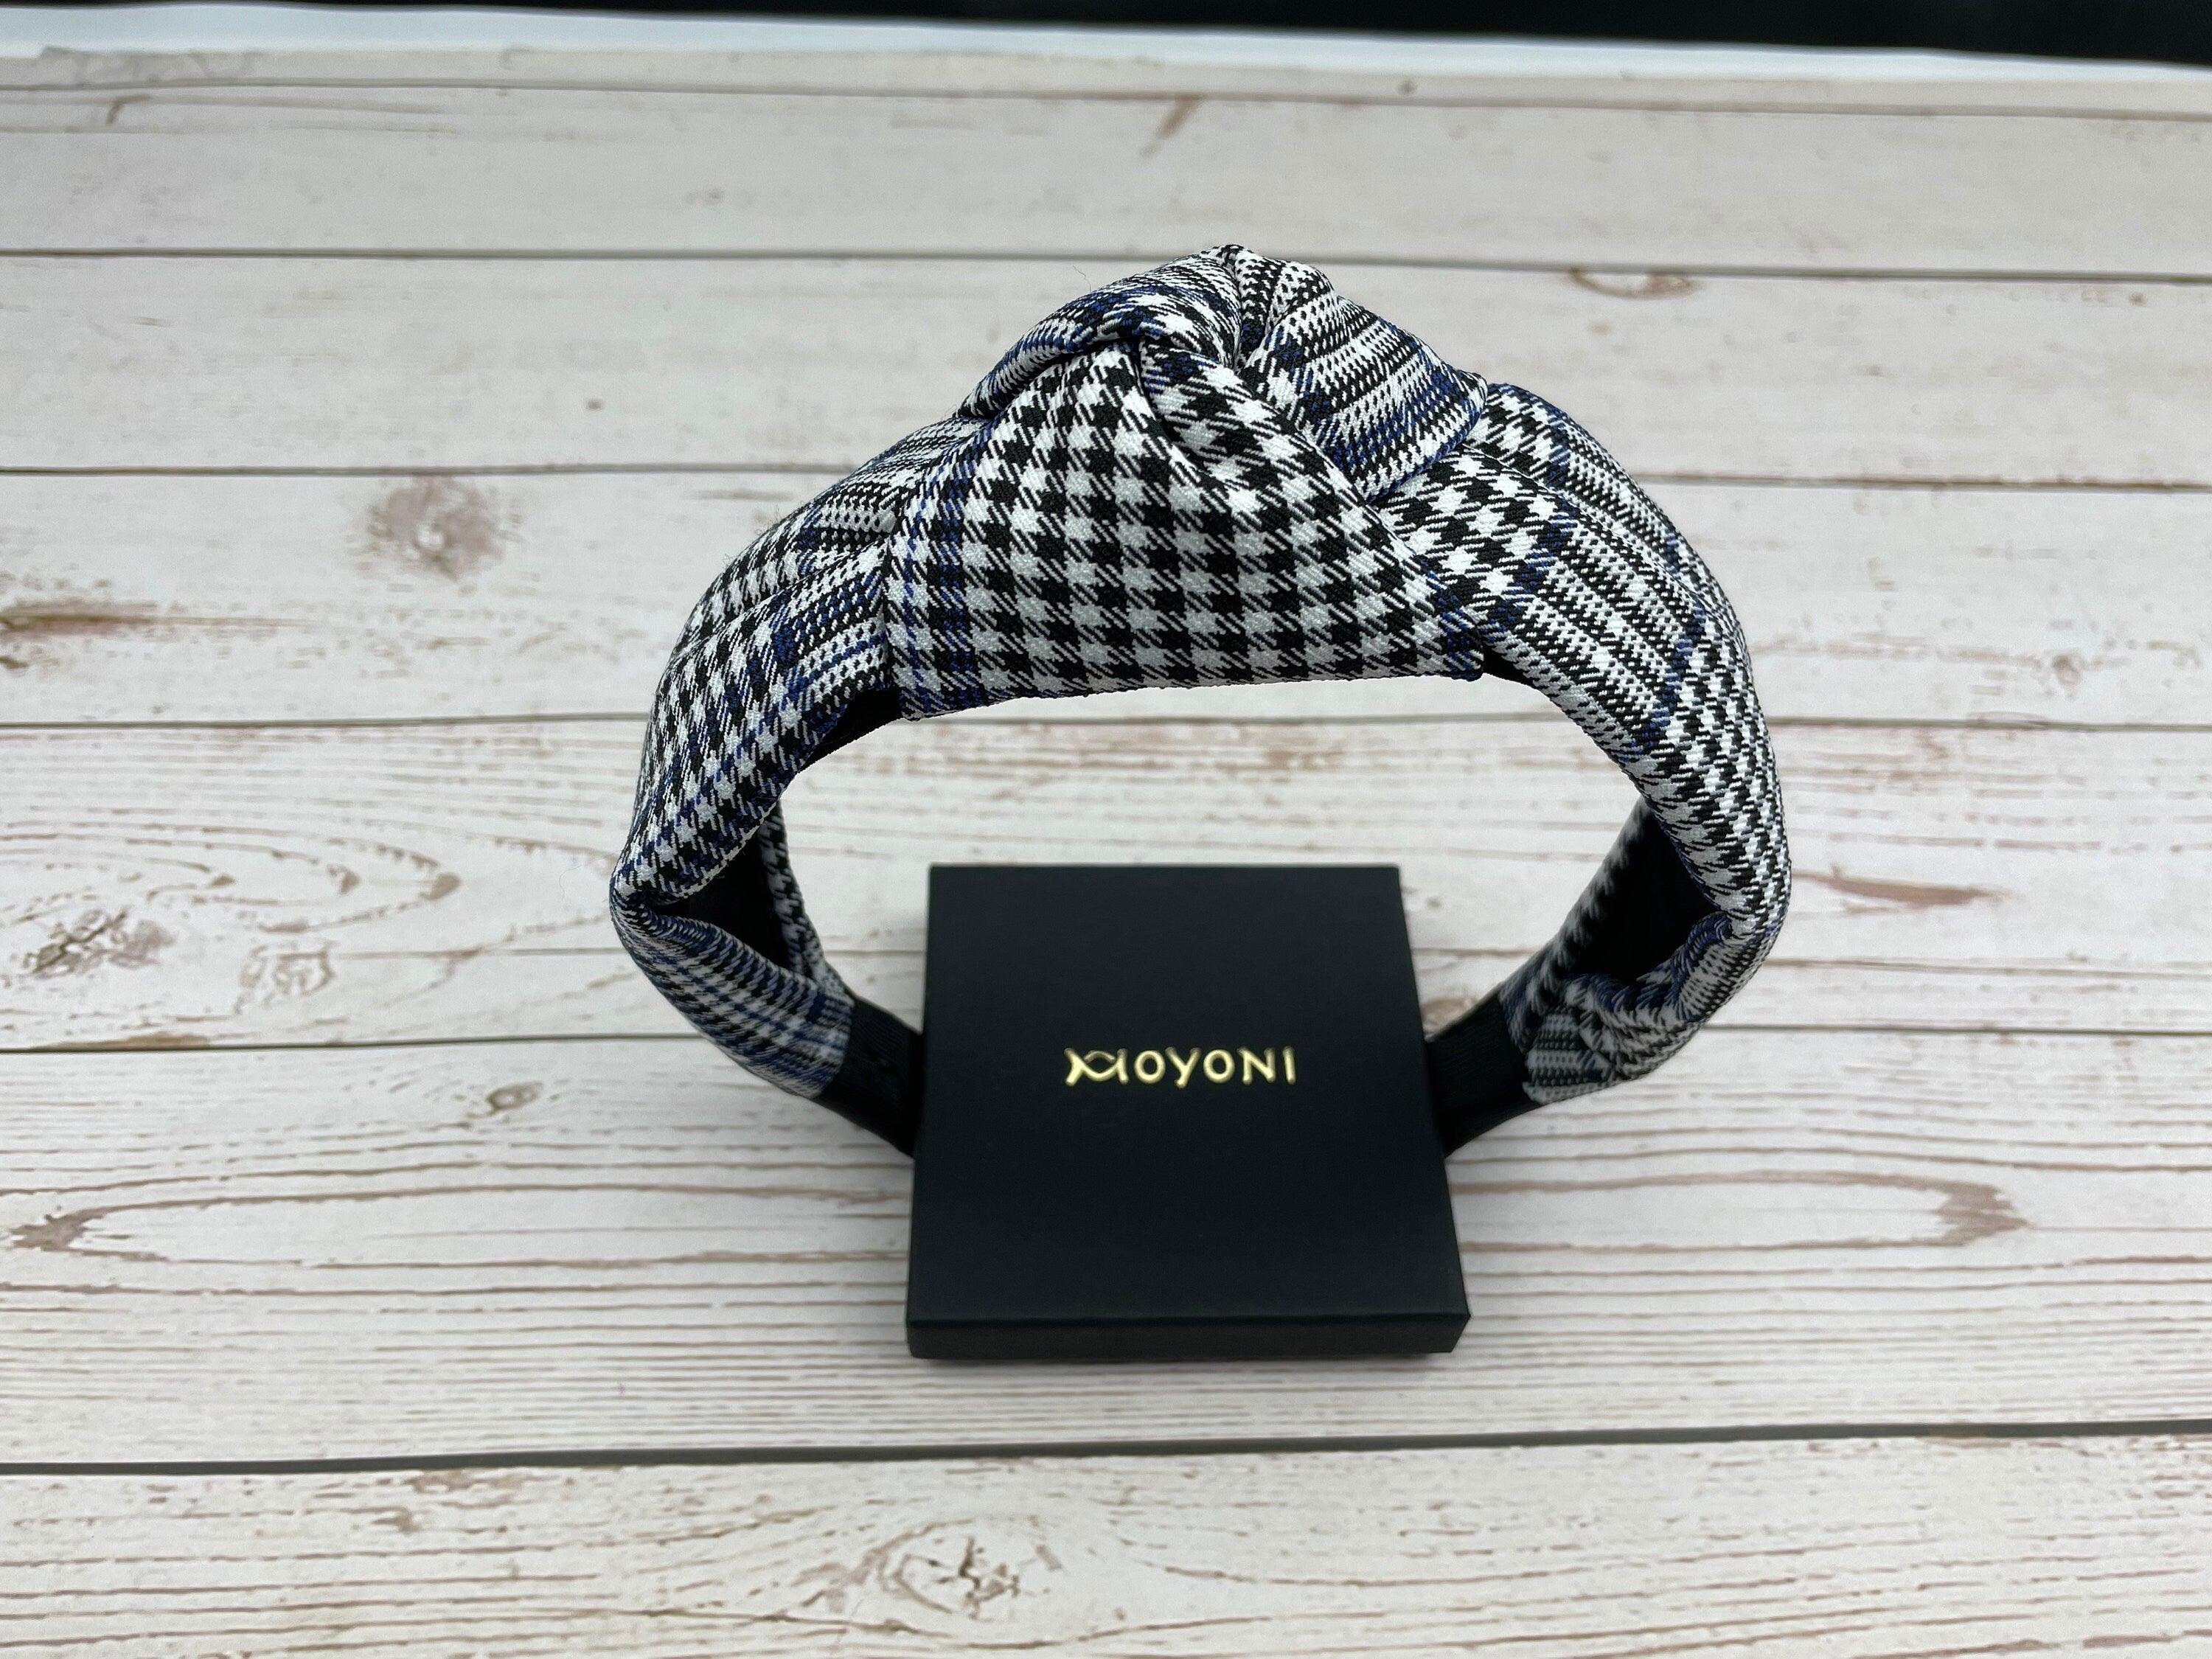 Stylish Classic Knotted Headband in Crepe White and Black with Dark Blue Stripes - Fashionable Hair Accessory for Women, Perfect for College available at Moyoni Design